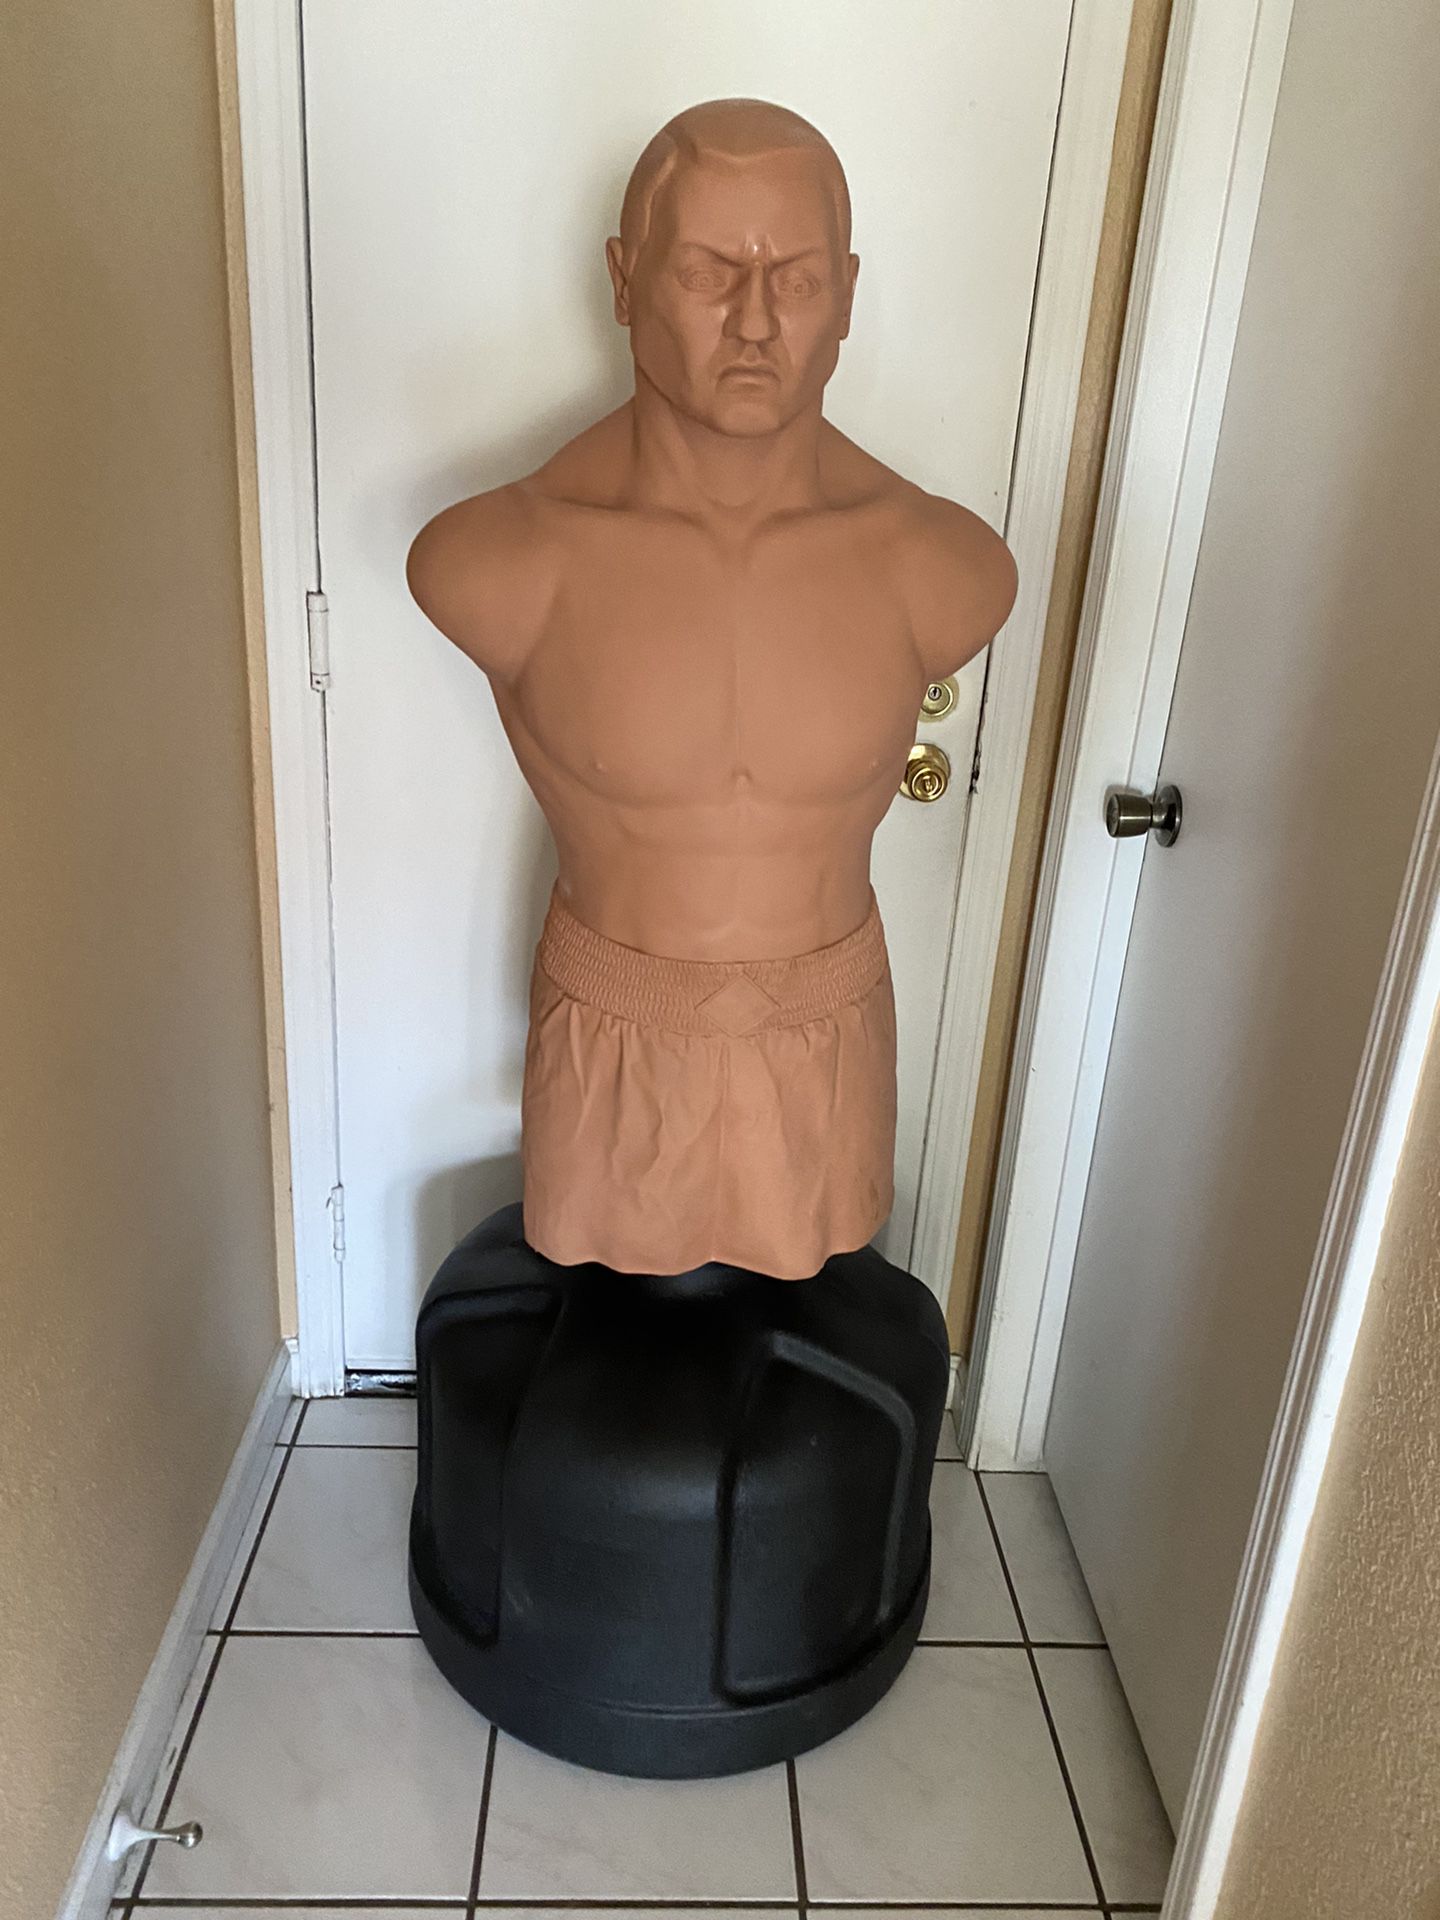 CENTURY BOB BADY PUNCHING BAG FILLED WITH WATER OR SAND MMA XXL PUNCHING BAG 6 FEET TALL 